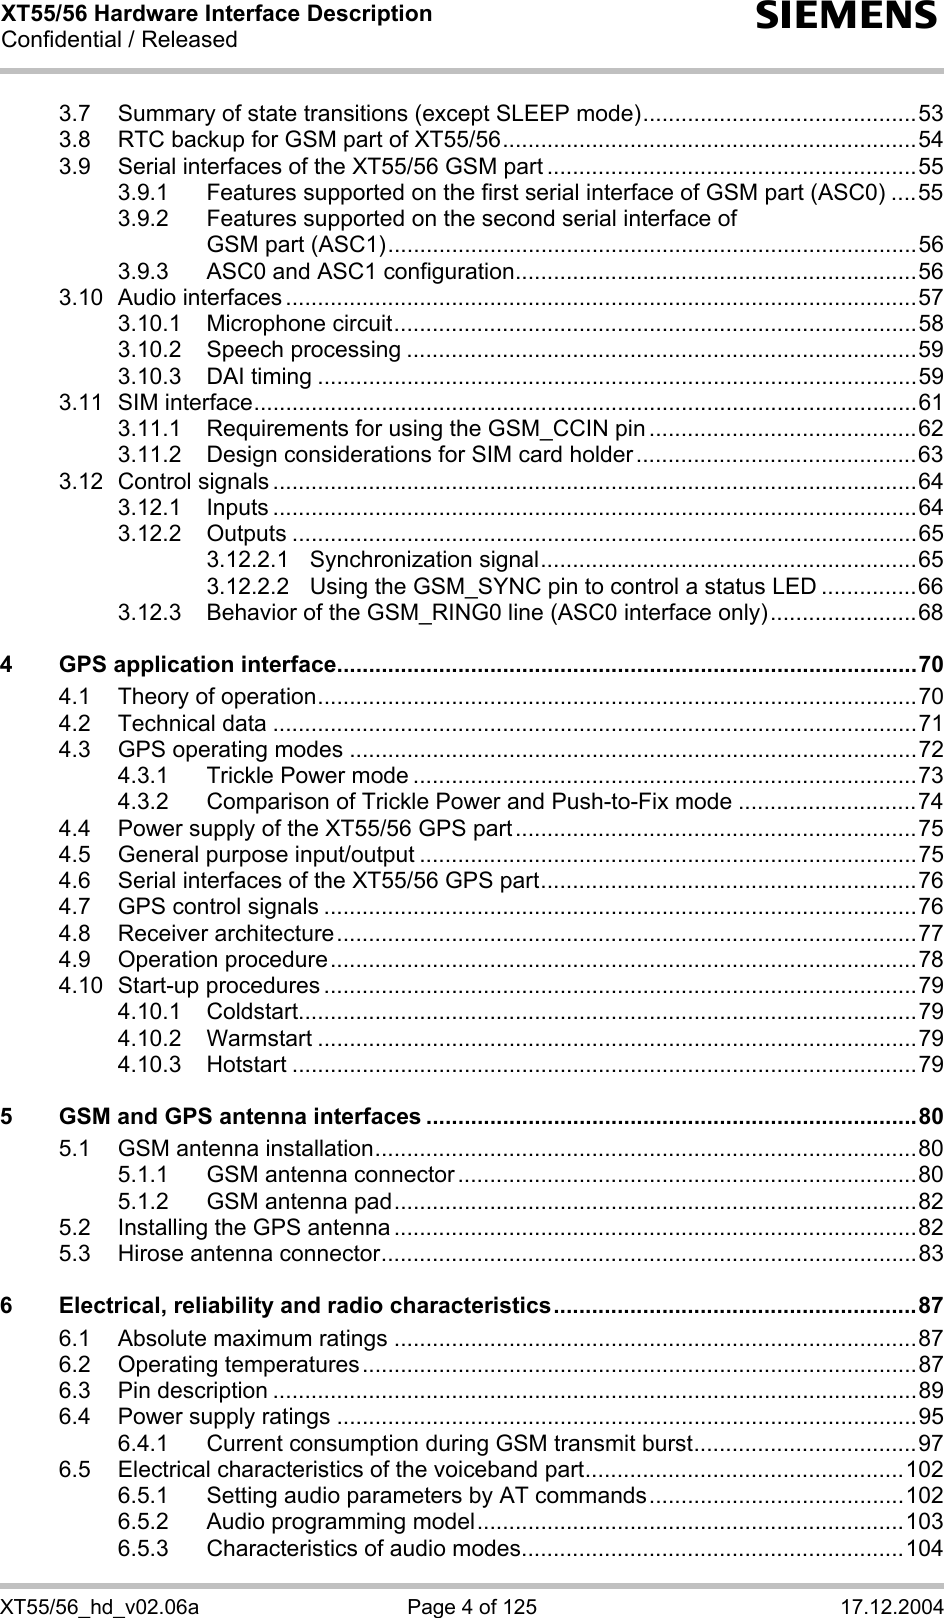 XT55/56 Hardware Interface Description Confidential / Released s XT55/56_hd_v02.06a  Page 4 of 125  17.12.2004 3.7 Summary of state transitions (except SLEEP mode)...........................................53 3.8 RTC backup for GSM part of XT55/56.................................................................54 3.9 Serial interfaces of the XT55/56 GSM part ..........................................................55 3.9.1 Features supported on the first serial interface of GSM part (ASC0) ....55 3.9.2 Features supported on the second serial interface of  GSM part (ASC1)...................................................................................56 3.9.3 ASC0 and ASC1 configuration...............................................................56 3.10 Audio interfaces ...................................................................................................57 3.10.1 Microphone circuit..................................................................................58 3.10.2 Speech processing ................................................................................59 3.10.3 DAI timing ..............................................................................................59 3.11 SIM interface........................................................................................................61 3.11.1 Requirements for using the GSM_CCIN pin ..........................................62 3.11.2 Design considerations for SIM card holder............................................63 3.12 Control signals .....................................................................................................64 3.12.1 Inputs .....................................................................................................64 3.12.2 Outputs ..................................................................................................65 3.12.2.1 Synchronization signal...........................................................65 3.12.2.2 Using the GSM_SYNC pin to control a status LED ...............66 3.12.3 Behavior of the GSM_RING0 line (ASC0 interface only).......................68 4 GPS application interface...........................................................................................70 4.1 Theory of operation..............................................................................................70 4.2 Technical data .....................................................................................................71 4.3 GPS operating modes .........................................................................................72 4.3.1 Trickle Power mode ...............................................................................73 4.3.2 Comparison of Trickle Power and Push-to-Fix mode ............................74 4.4 Power supply of the XT55/56 GPS part...............................................................75 4.5 General purpose input/output ..............................................................................75 4.6 Serial interfaces of the XT55/56 GPS part...........................................................76 4.7 GPS control signals .............................................................................................76 4.8 Receiver architecture...........................................................................................77 4.9 Operation procedure............................................................................................78 4.10 Start-up procedures .............................................................................................79 4.10.1 Coldstart.................................................................................................79 4.10.2 Warmstart ..............................................................................................79 4.10.3 Hotstart ..................................................................................................79 5 GSM and GPS antenna interfaces .............................................................................80 5.1 GSM antenna installation.....................................................................................80 5.1.1 GSM antenna connector ........................................................................80 5.1.2 GSM antenna pad..................................................................................82 5.2 Installing the GPS antenna ..................................................................................82 5.3 Hirose antenna connector....................................................................................83 6 Electrical, reliability and radio characteristics.........................................................87 6.1 Absolute maximum ratings ..................................................................................87 6.2 Operating temperatures.......................................................................................87 6.3 Pin description .....................................................................................................89 6.4 Power supply ratings ...........................................................................................95 6.4.1 Current consumption during GSM transmit burst...................................97 6.5 Electrical characteristics of the voiceband part..................................................102 6.5.1 Setting audio parameters by AT commands........................................102 6.5.2 Audio programming model...................................................................103 6.5.3 Characteristics of audio modes............................................................104 